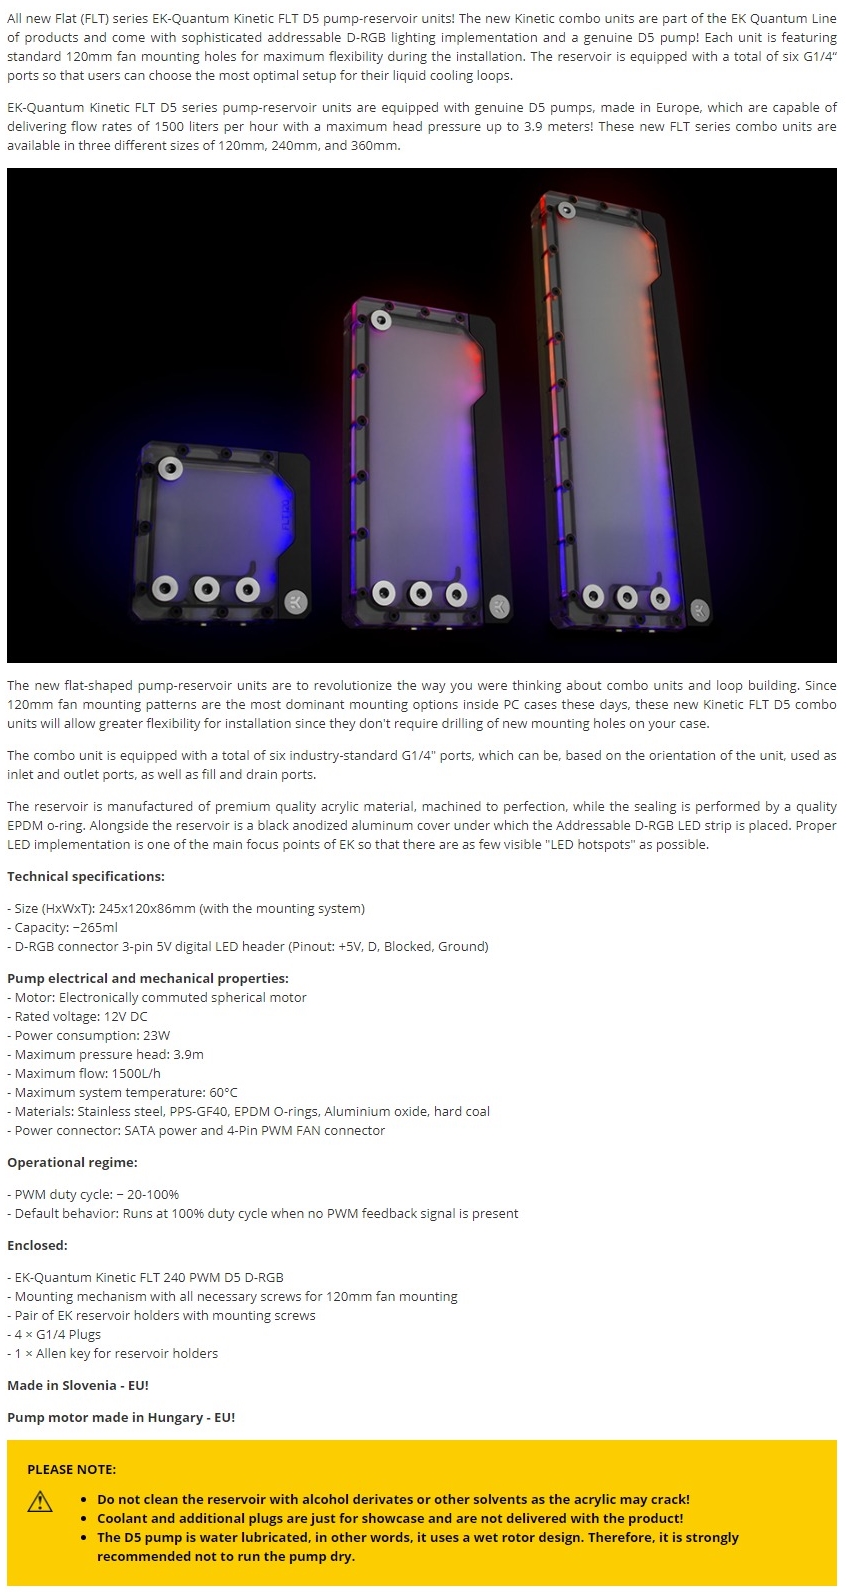 A large marketing image providing additional information about the product EK Quantum Kinetic FLT 240 D5 PWM D-RGB - Additional alt info not provided